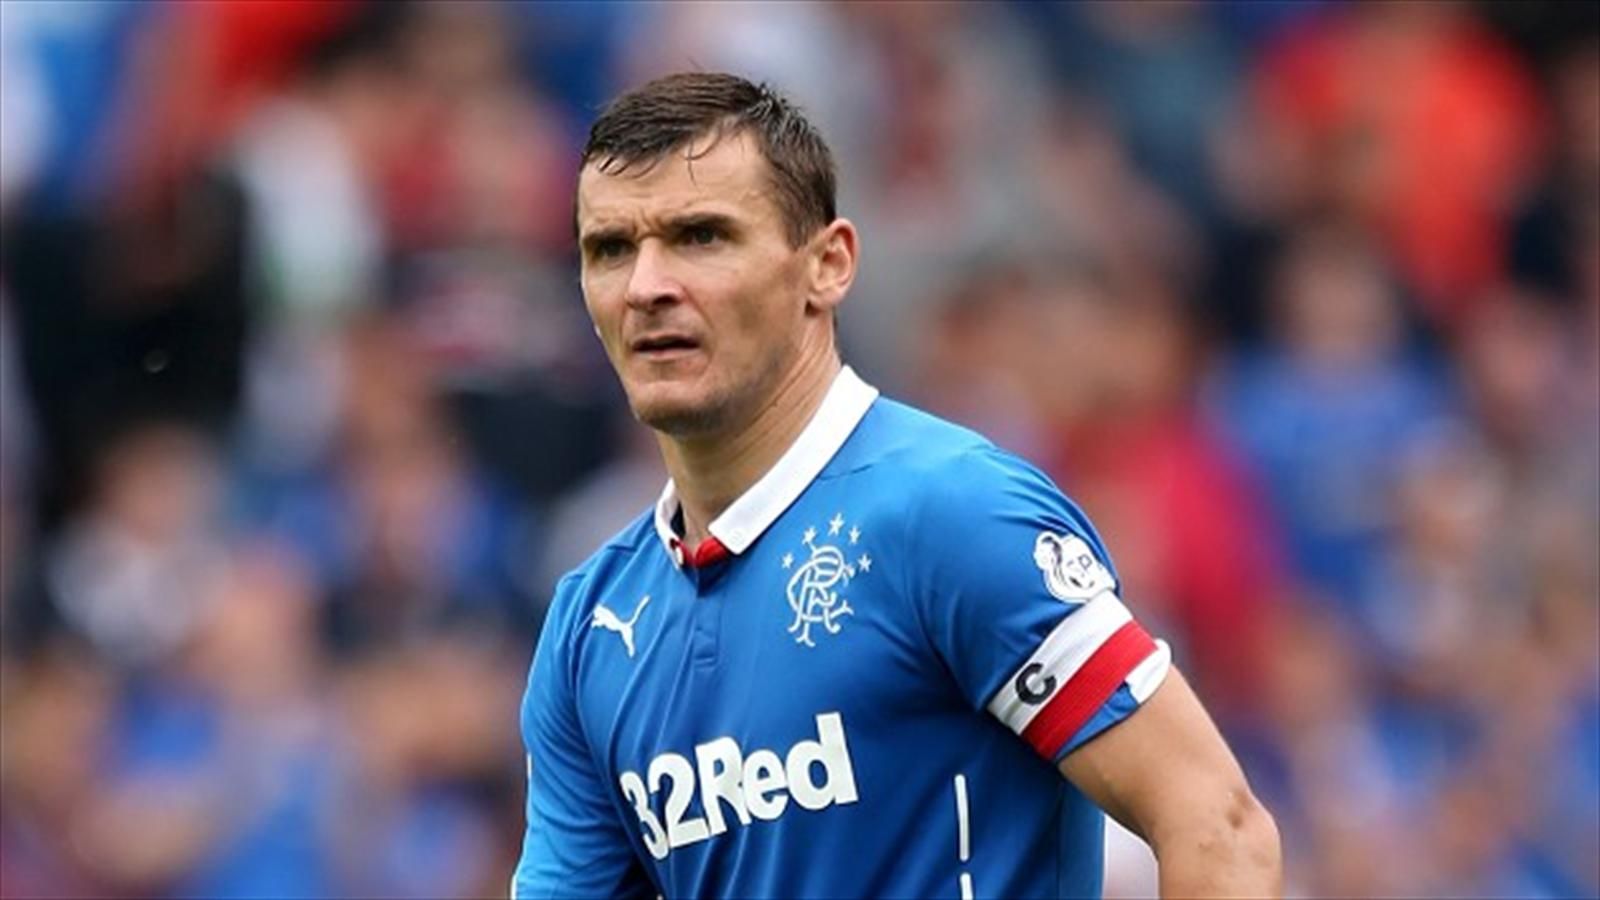 Good luck to Lee McCulloch, but he was no ‘fall guy’